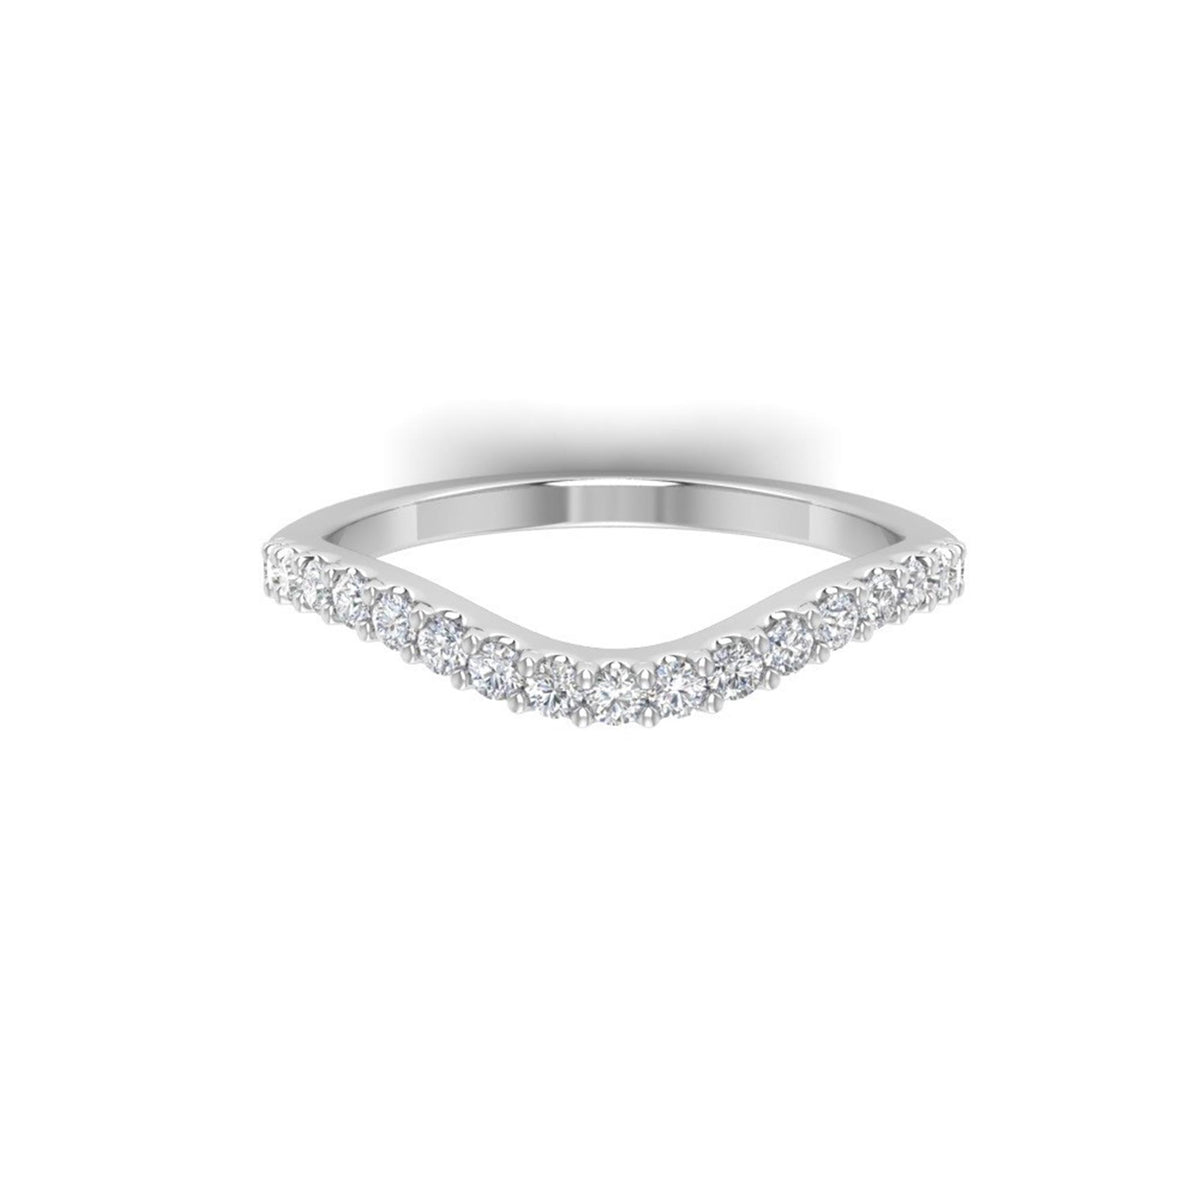 14Kt White Gold Curved Wedding Ring With 0.34cttw Natural Diamonds